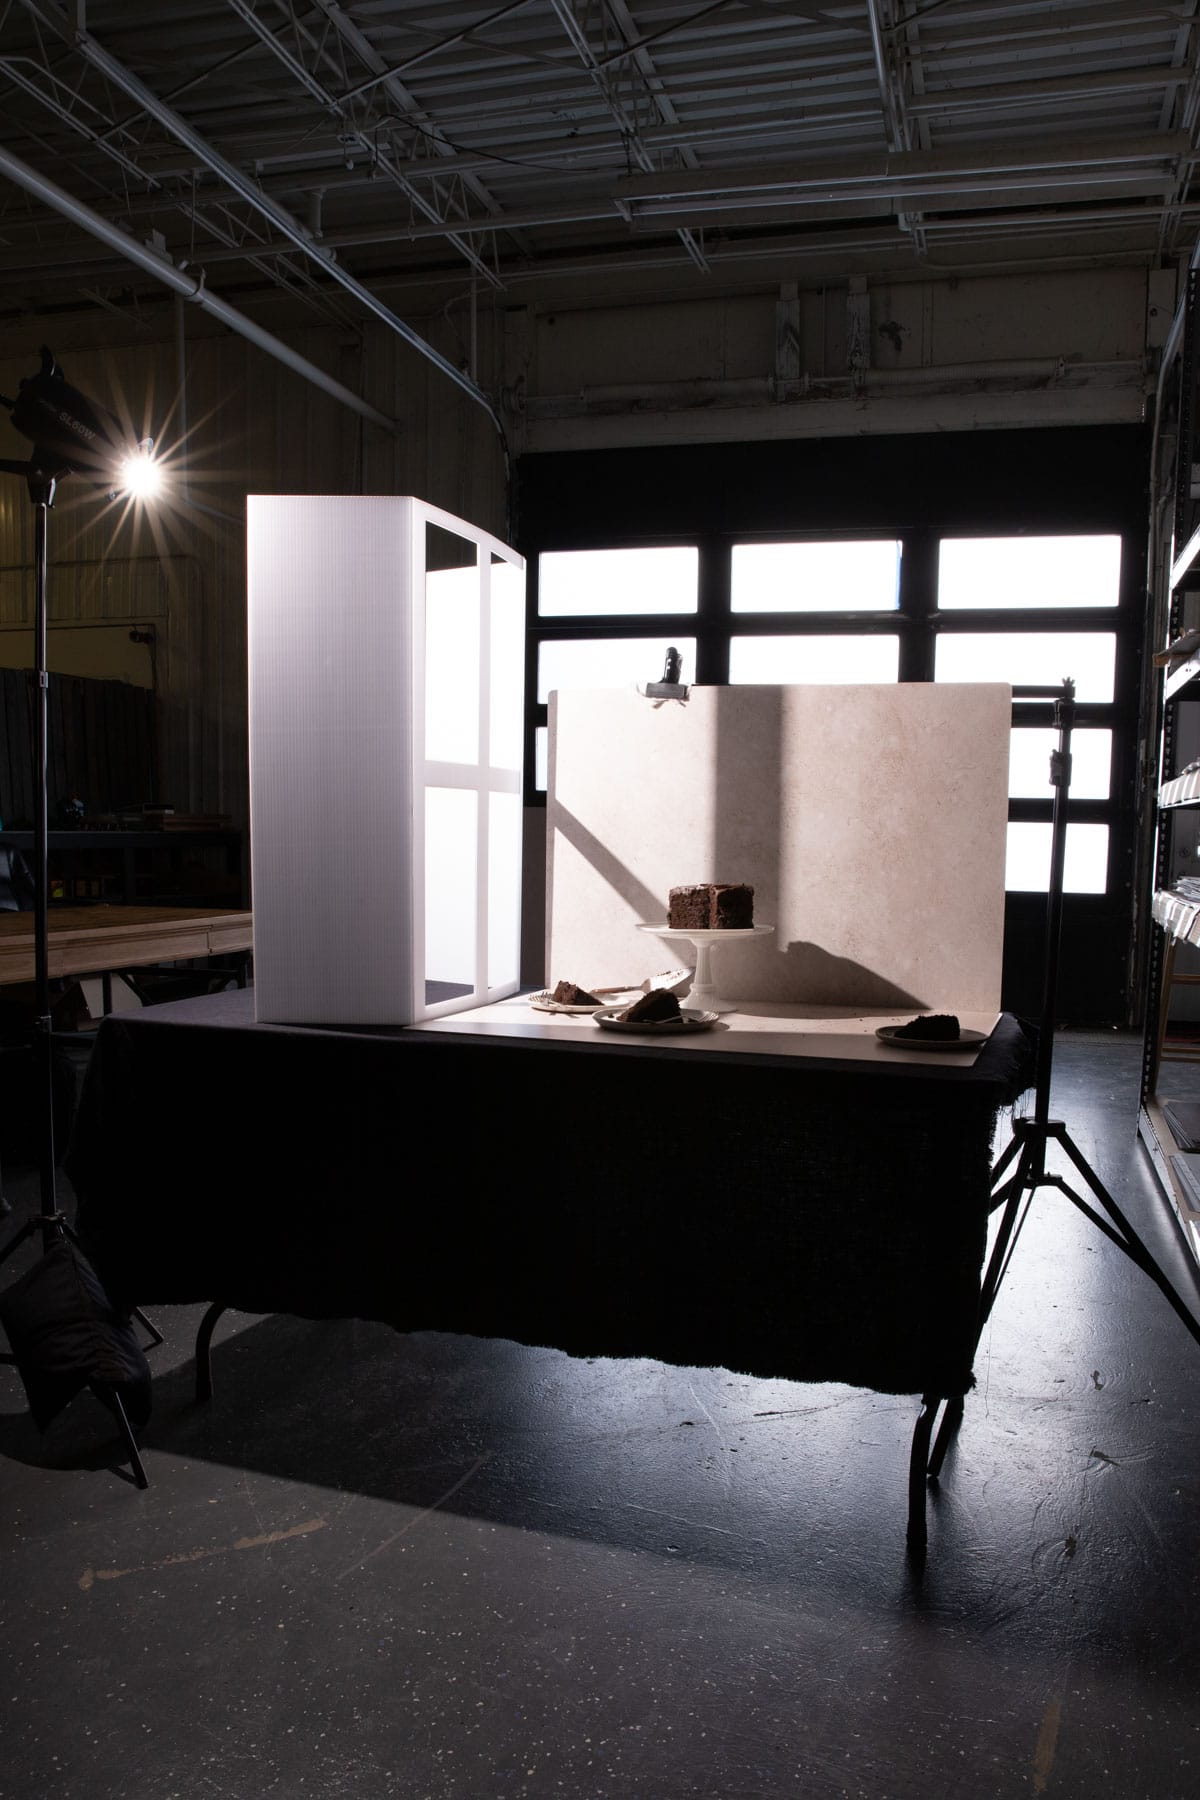 Behind the scenes of a photoshoot of chocolate cake with a fake window and artificial light